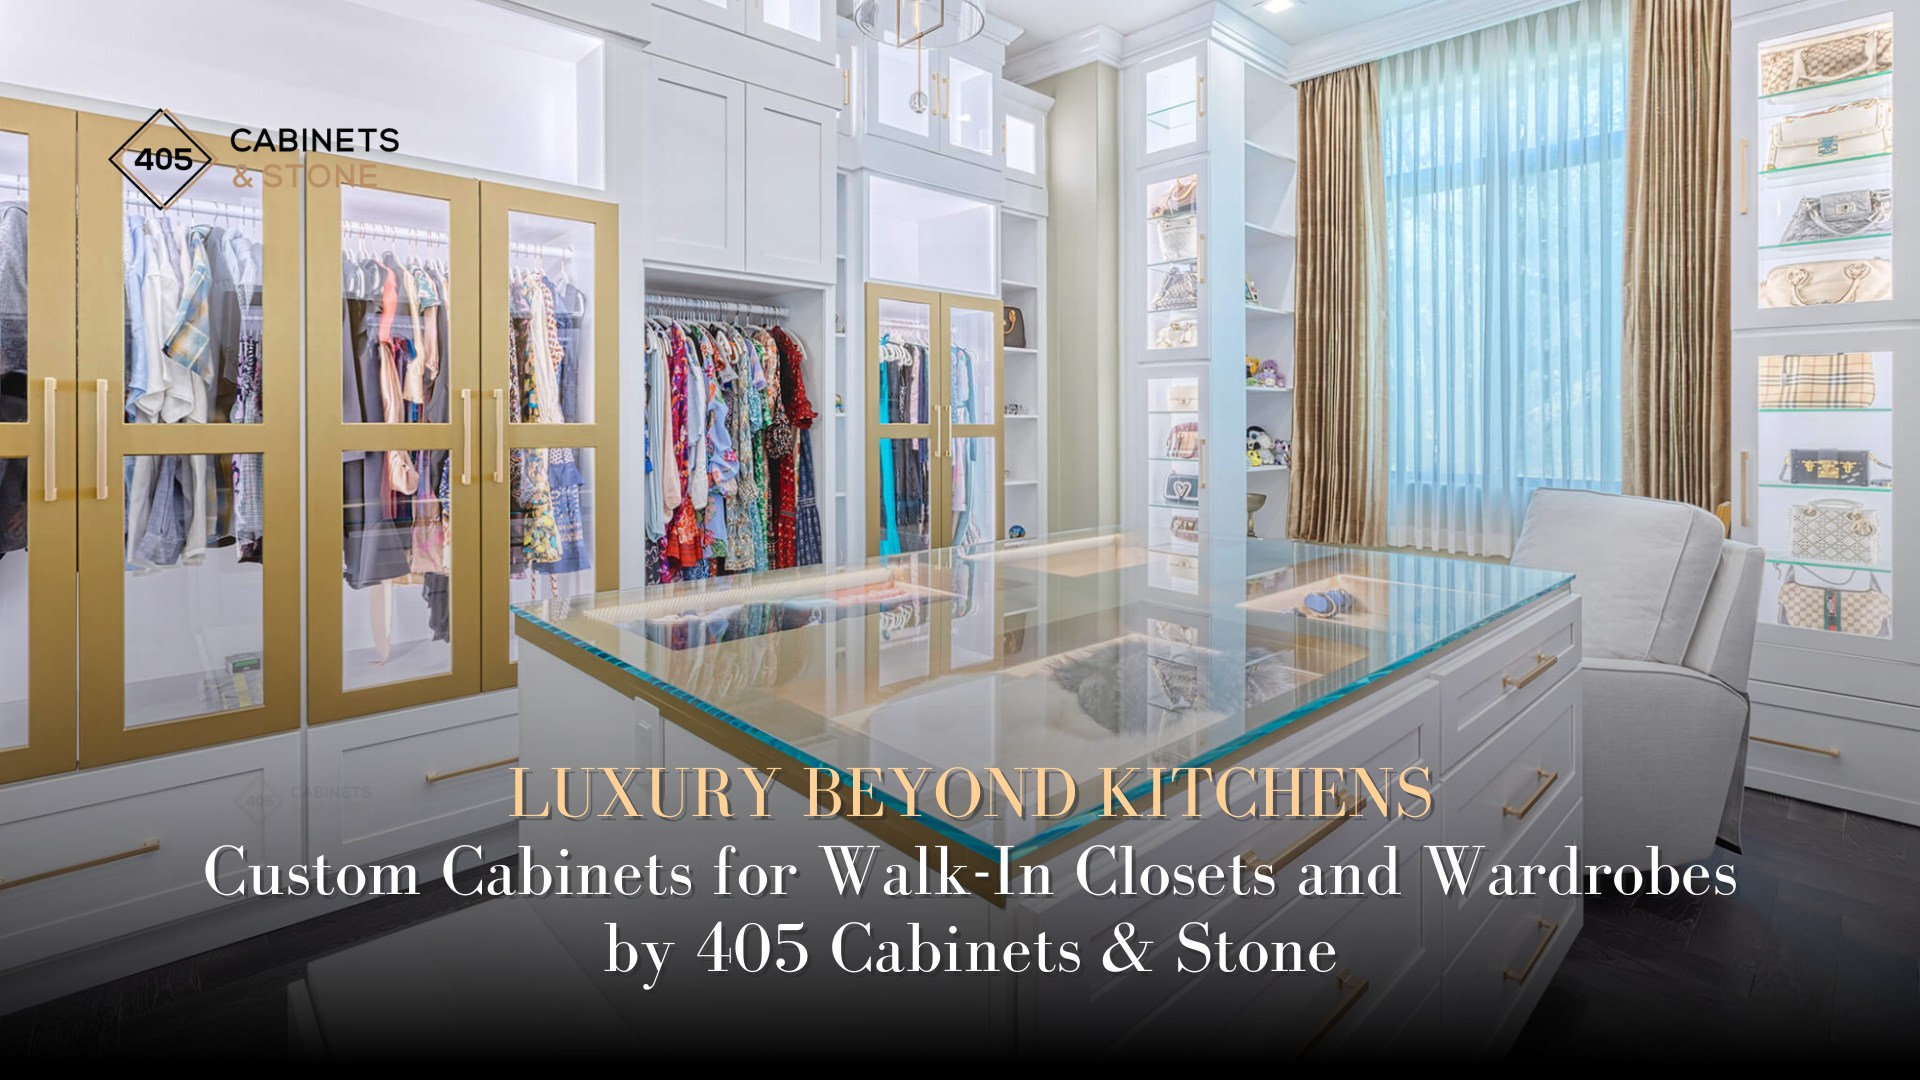 Custom Cabinets for Walk-In Closets and Wardrobes by 405 Cabinets & Stone